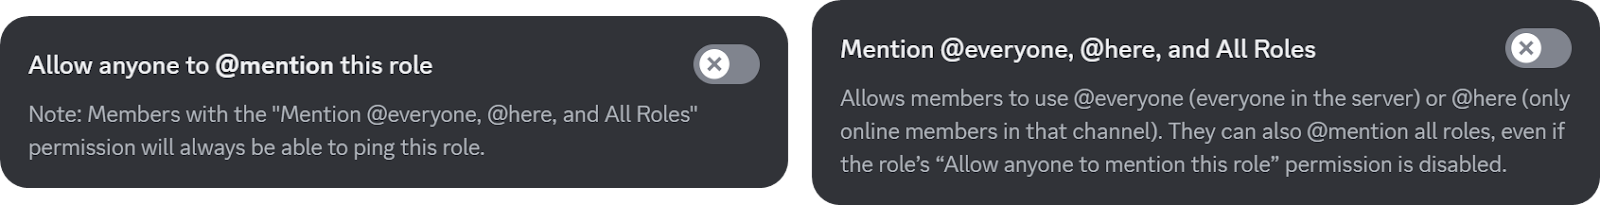 The "Allow anyone to @mention this role" option of a Discord role and the "Mention @everyone, here, and All Roles" permsision of a Discord role